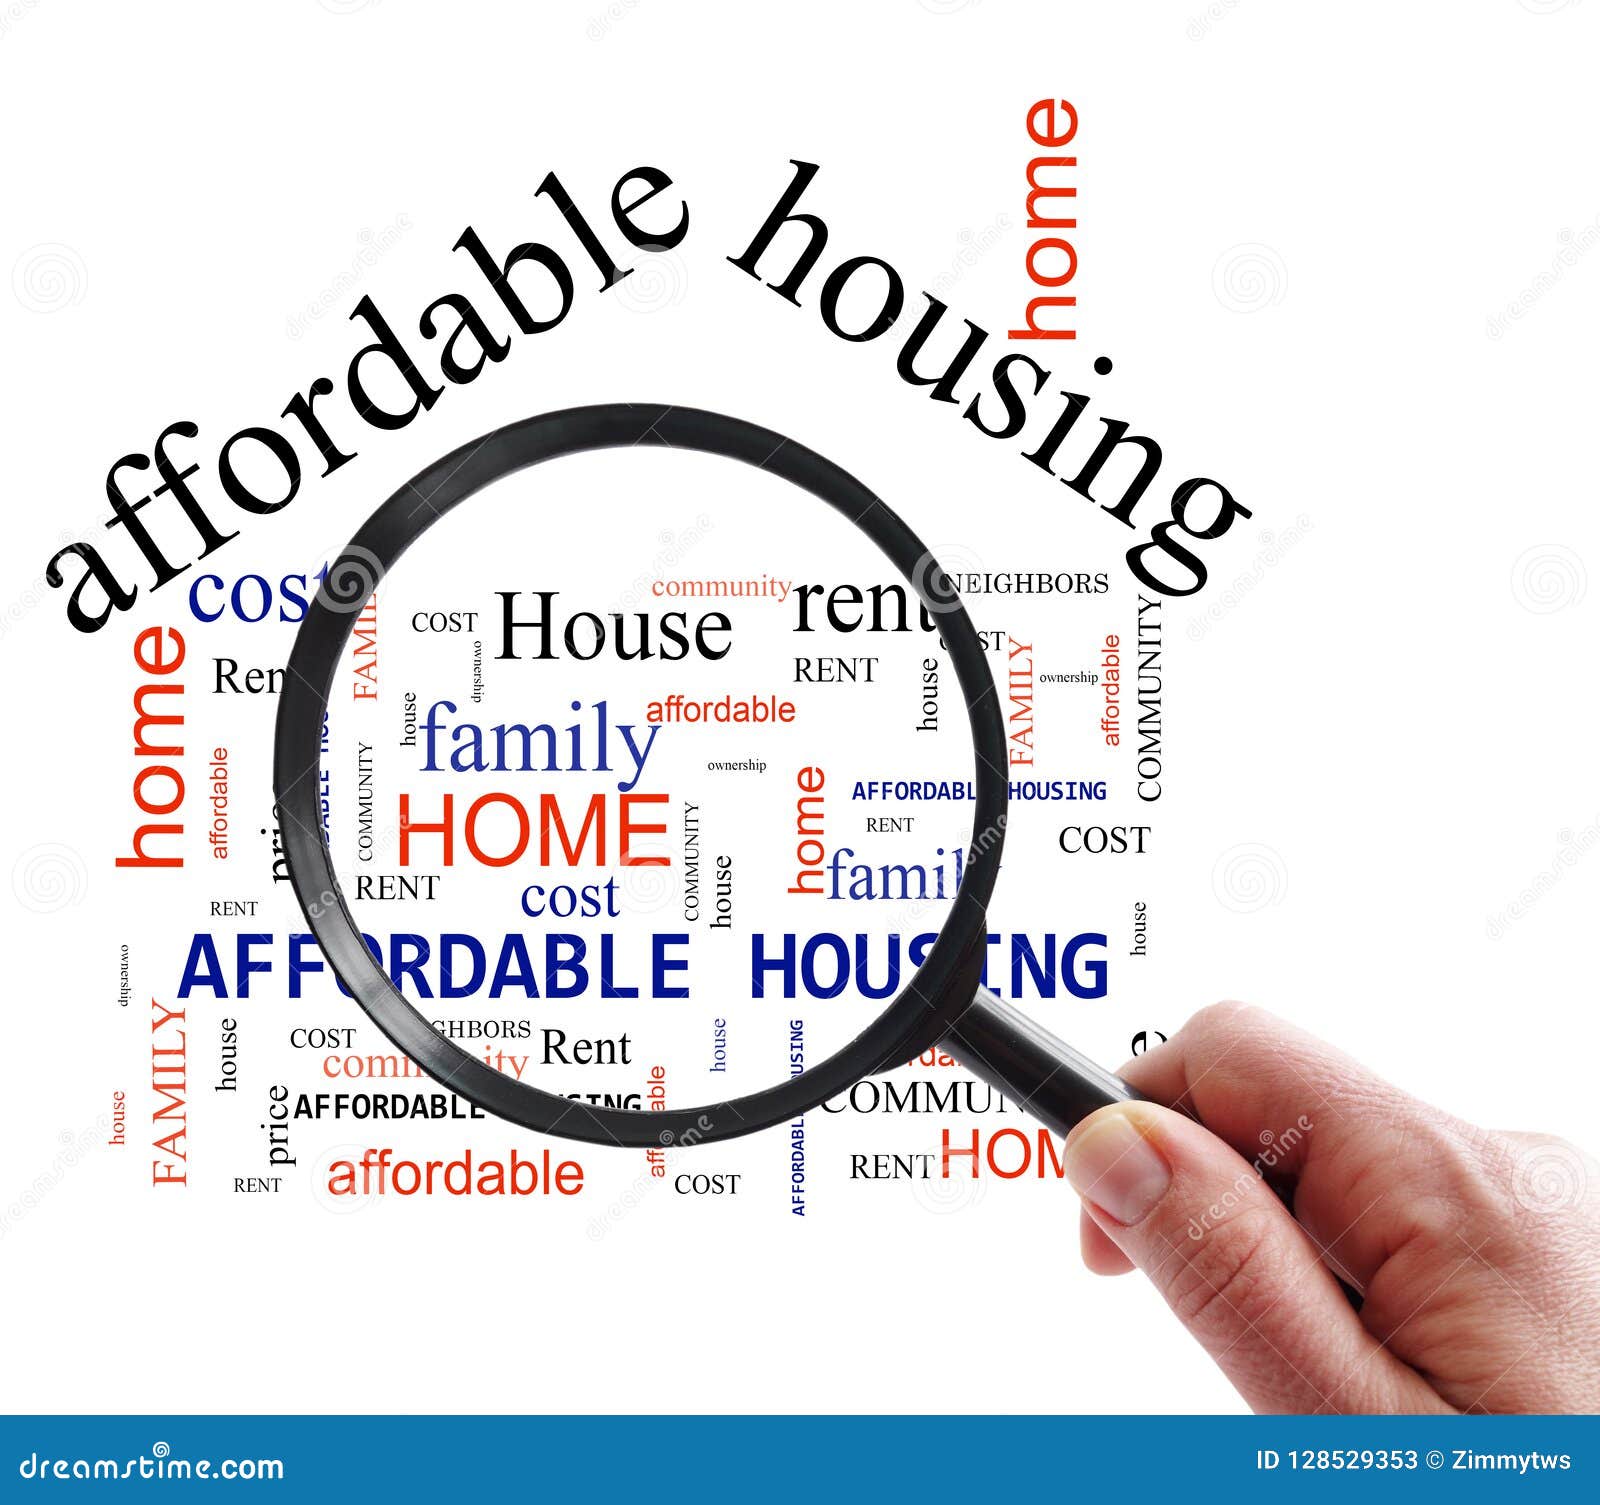 affordable housing search